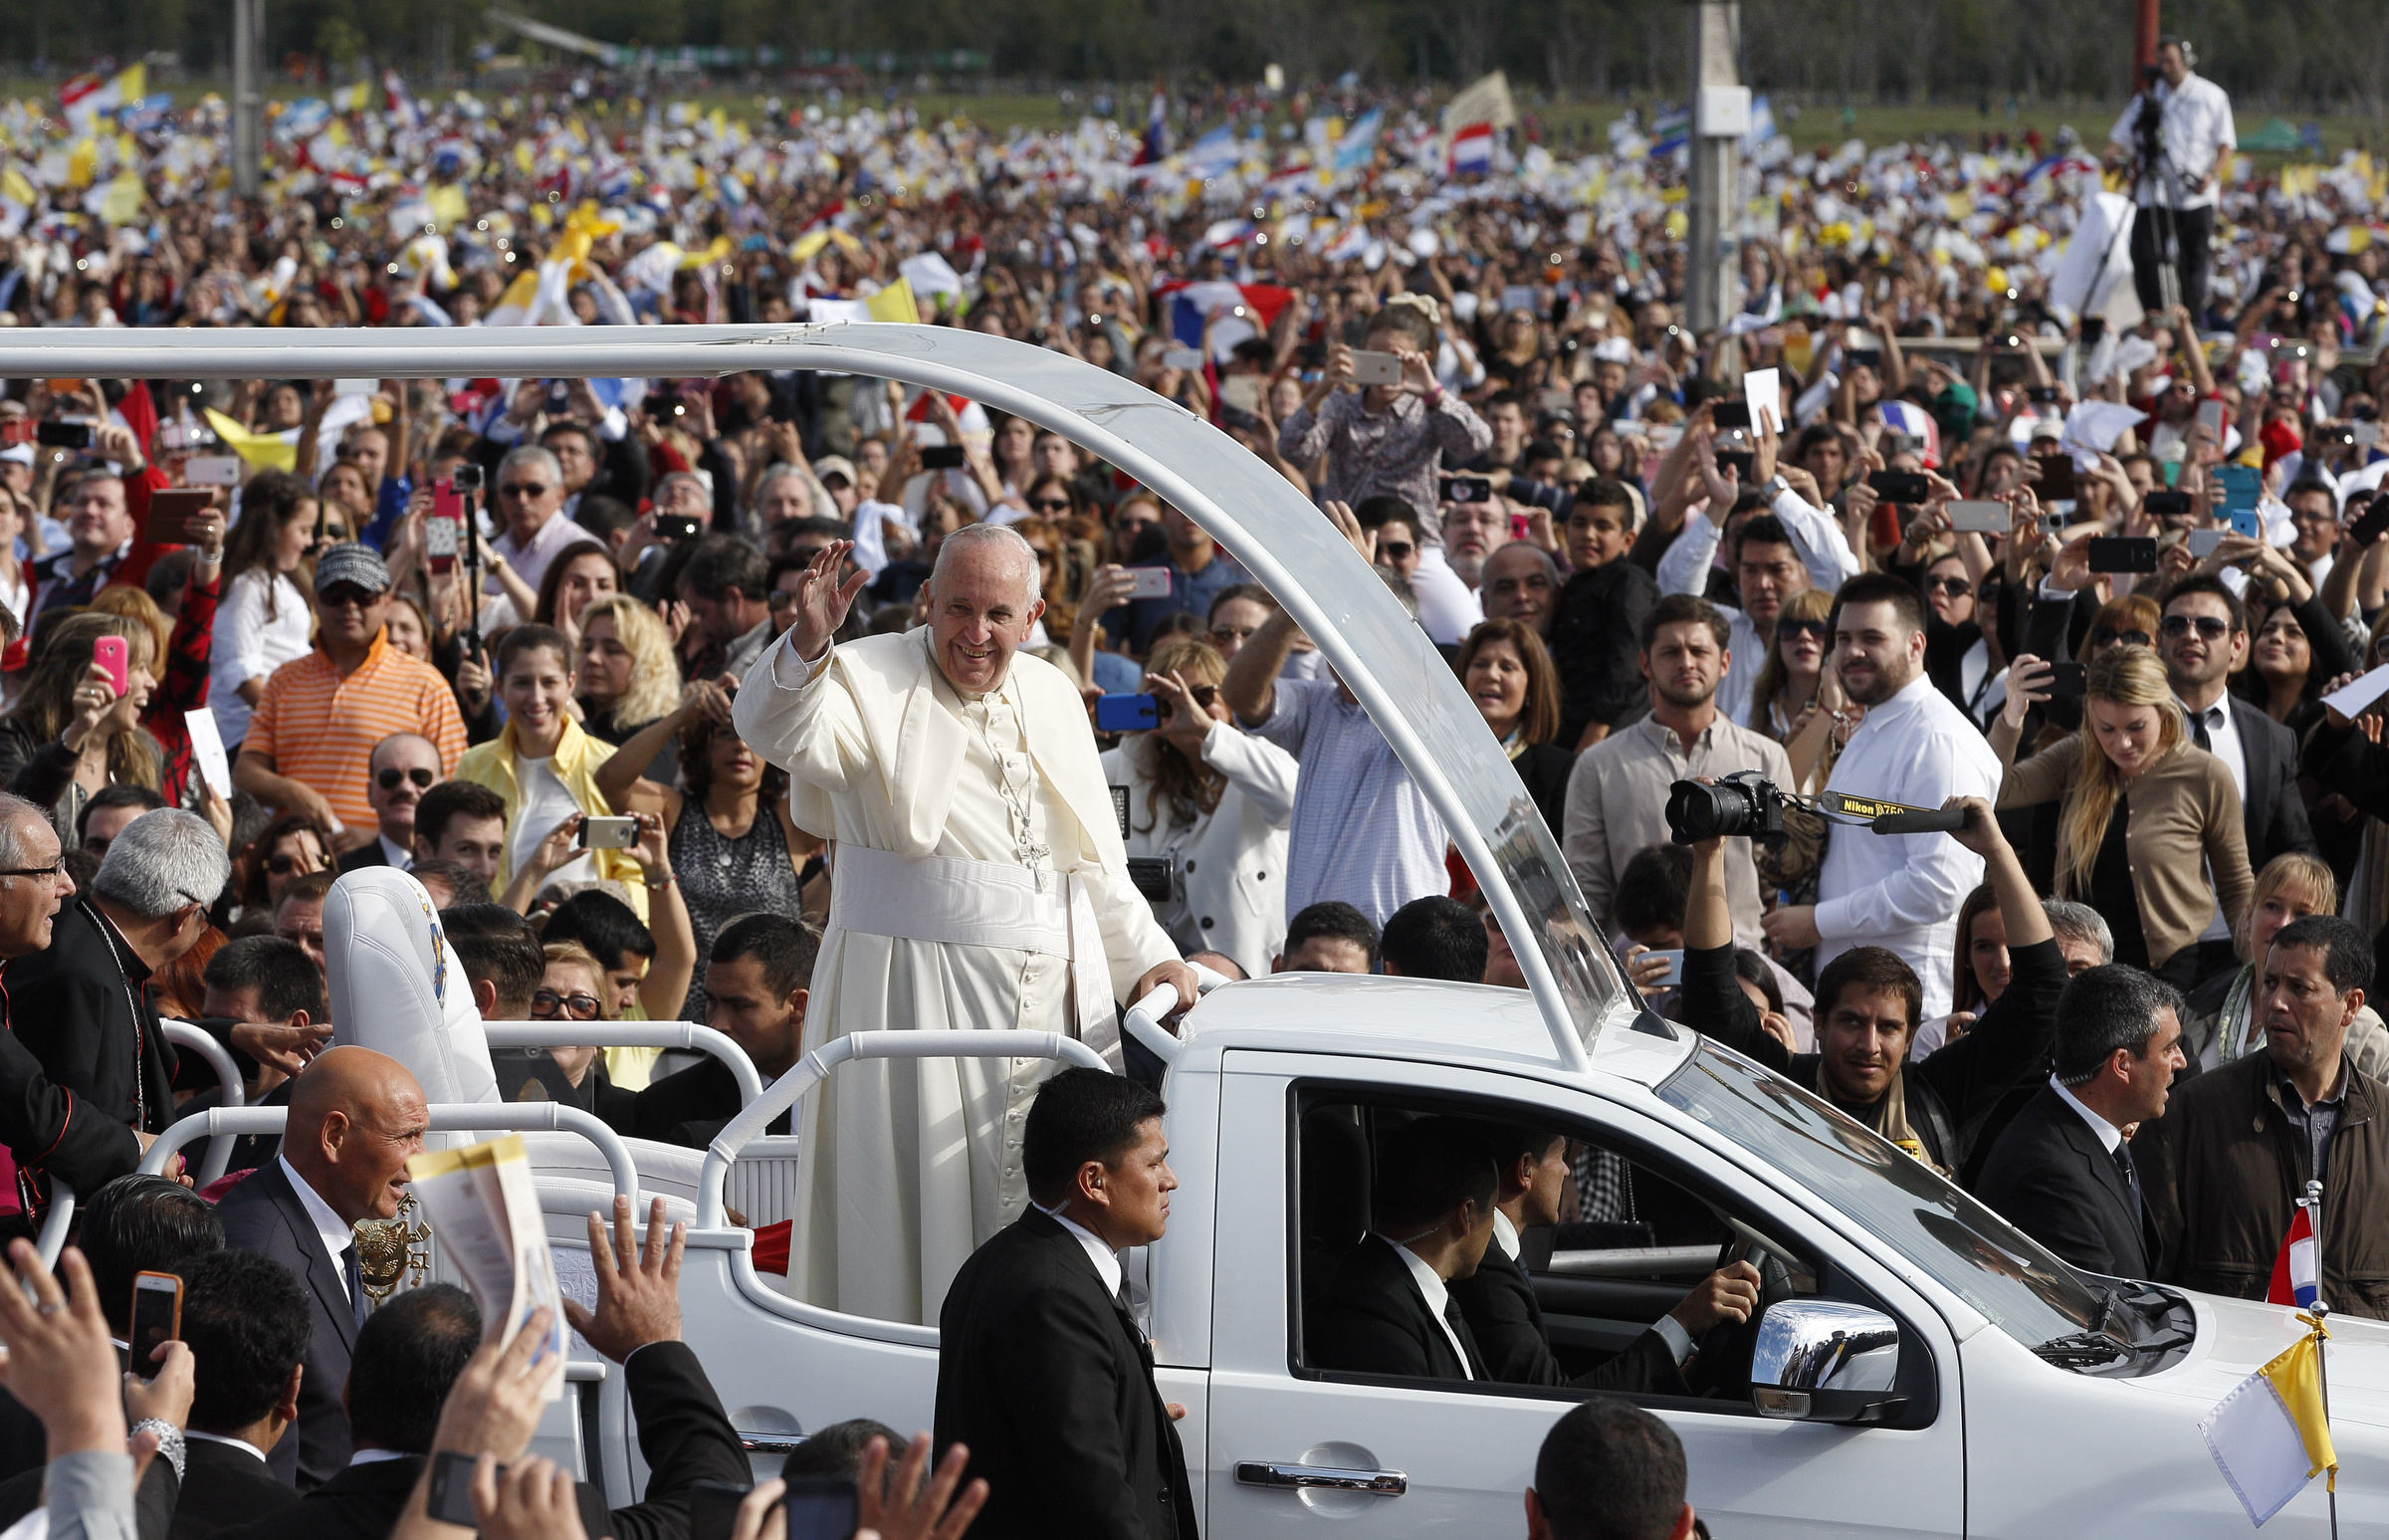 Pope Francis arrives to celebrate Mass in Nu Guazu Park in Asuncion, Paraguay, July 12. (CNS/Paul Haring)